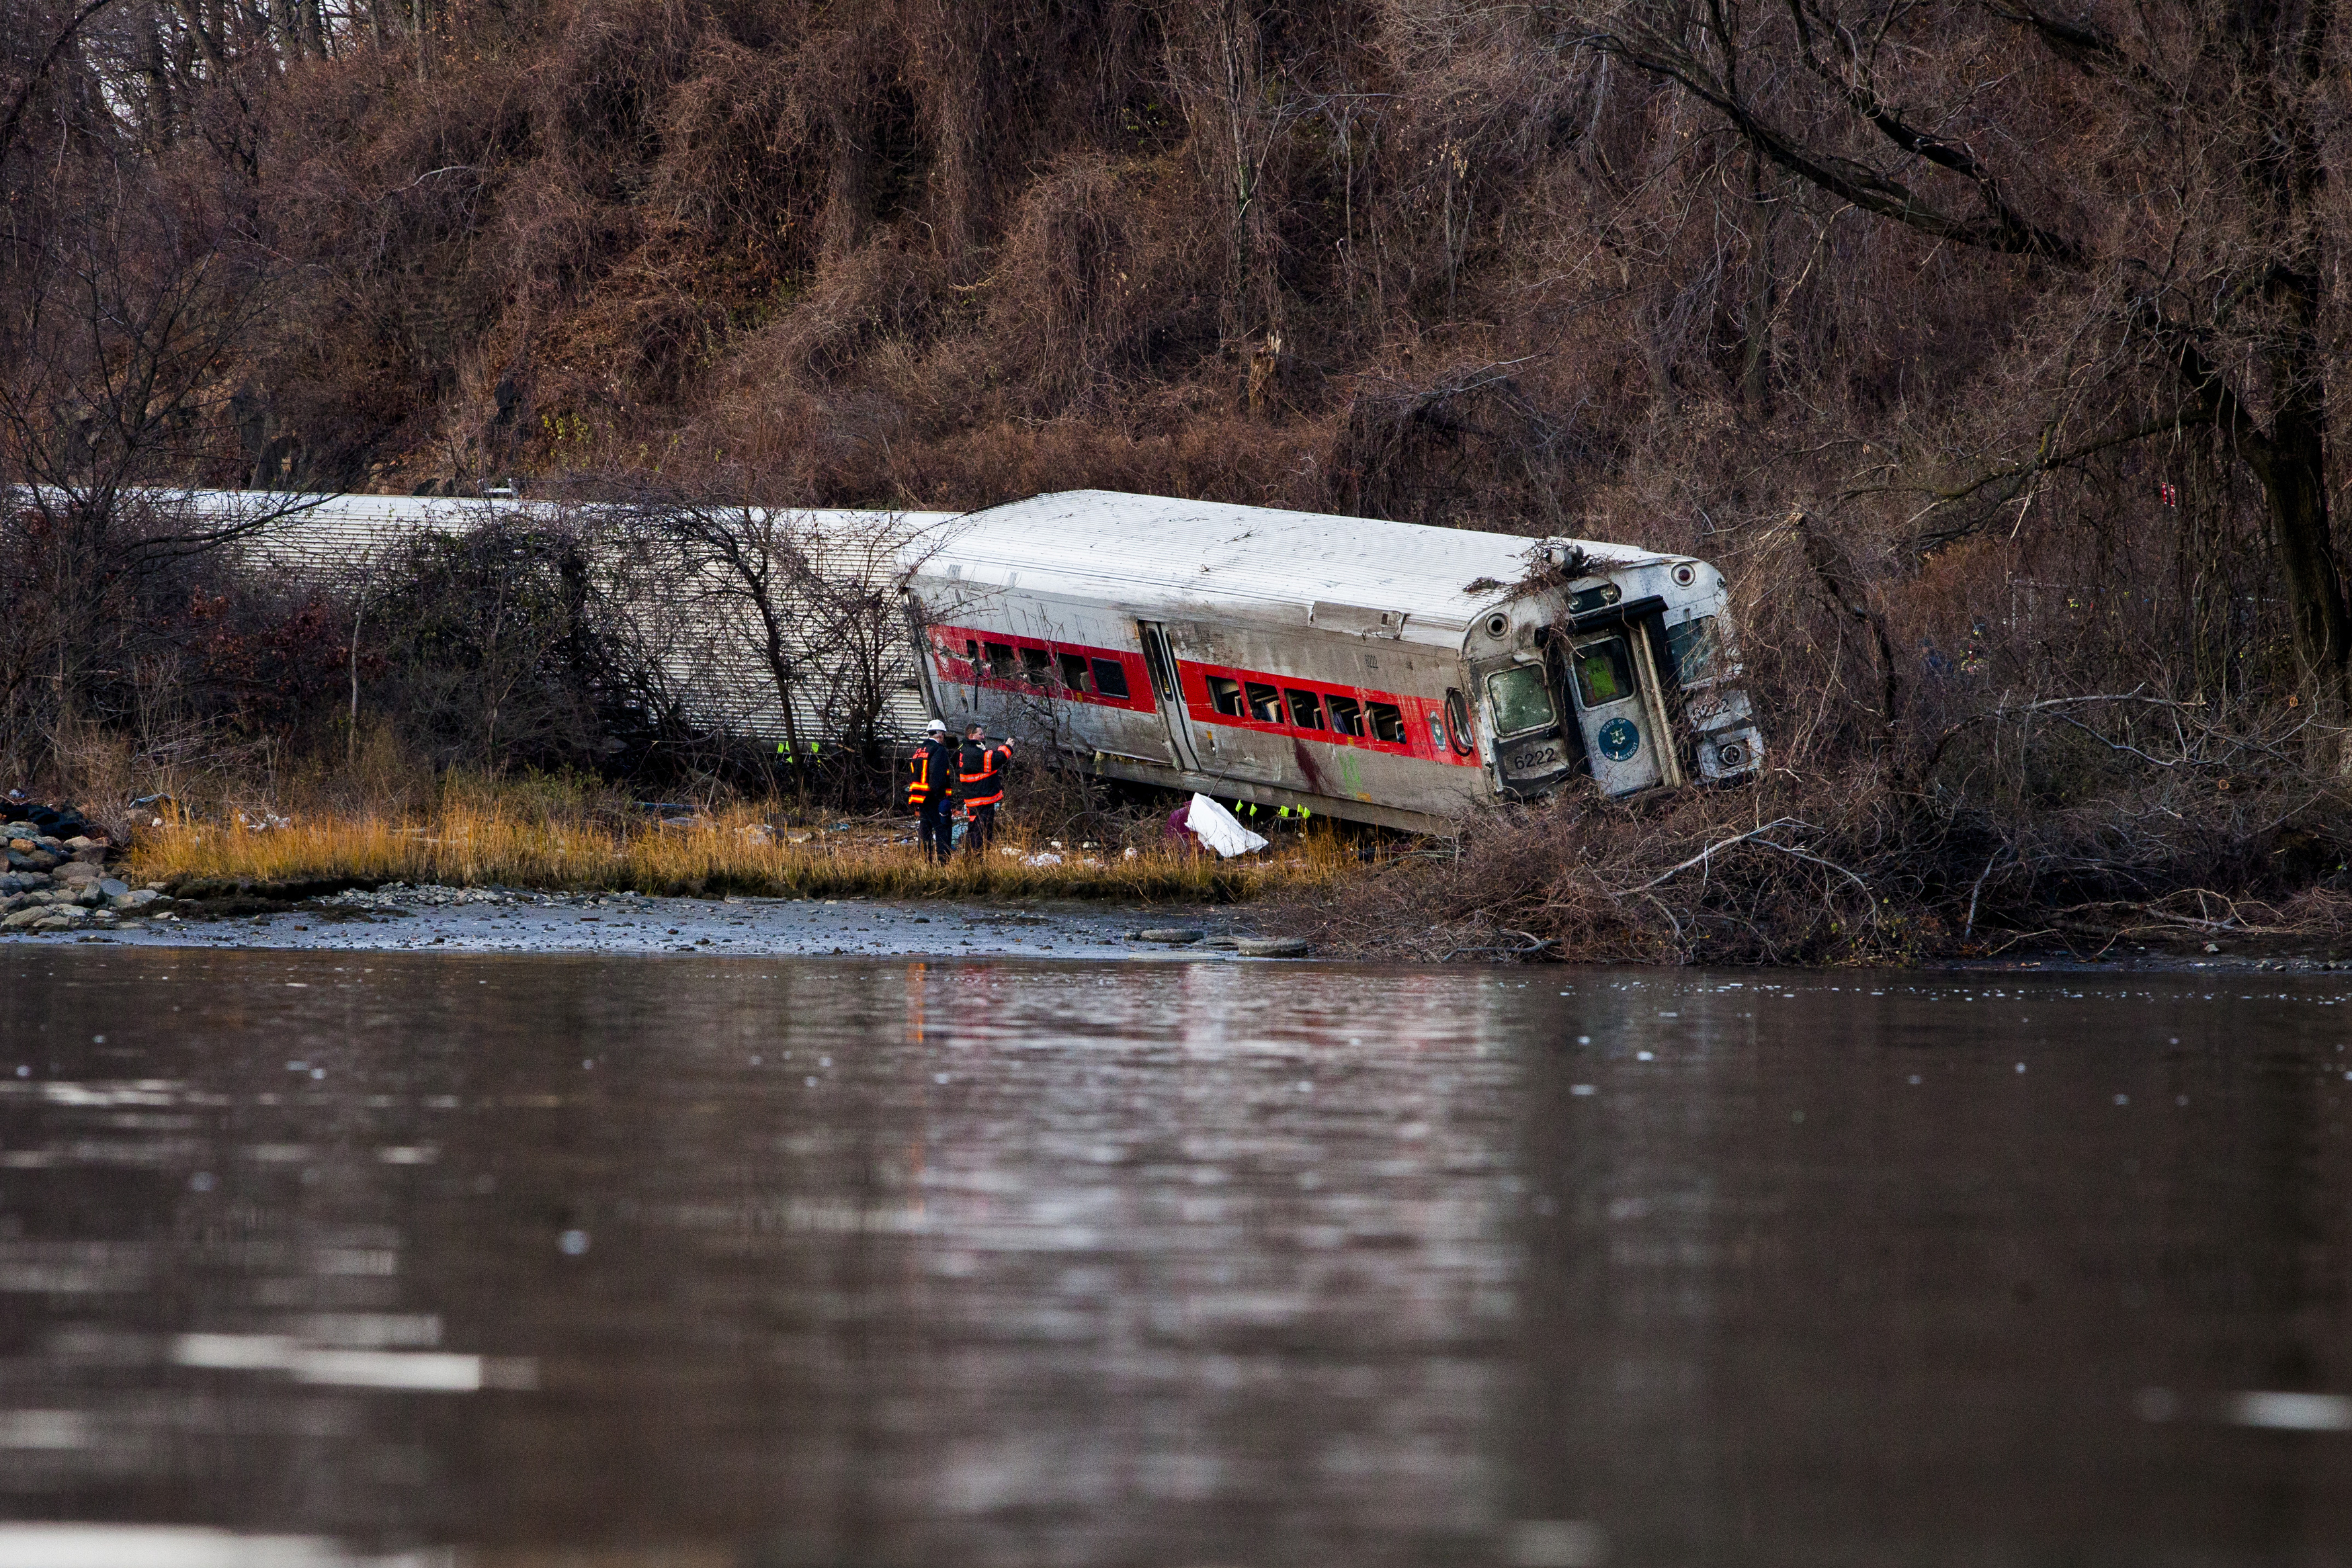 The wreckage of a Metro-North commuter train lies on its side after it derailed just north of the Spuyten Duyvil station December 1, 2013 in the Bronx, New York City. (Christopher Gregory—Getty Images)